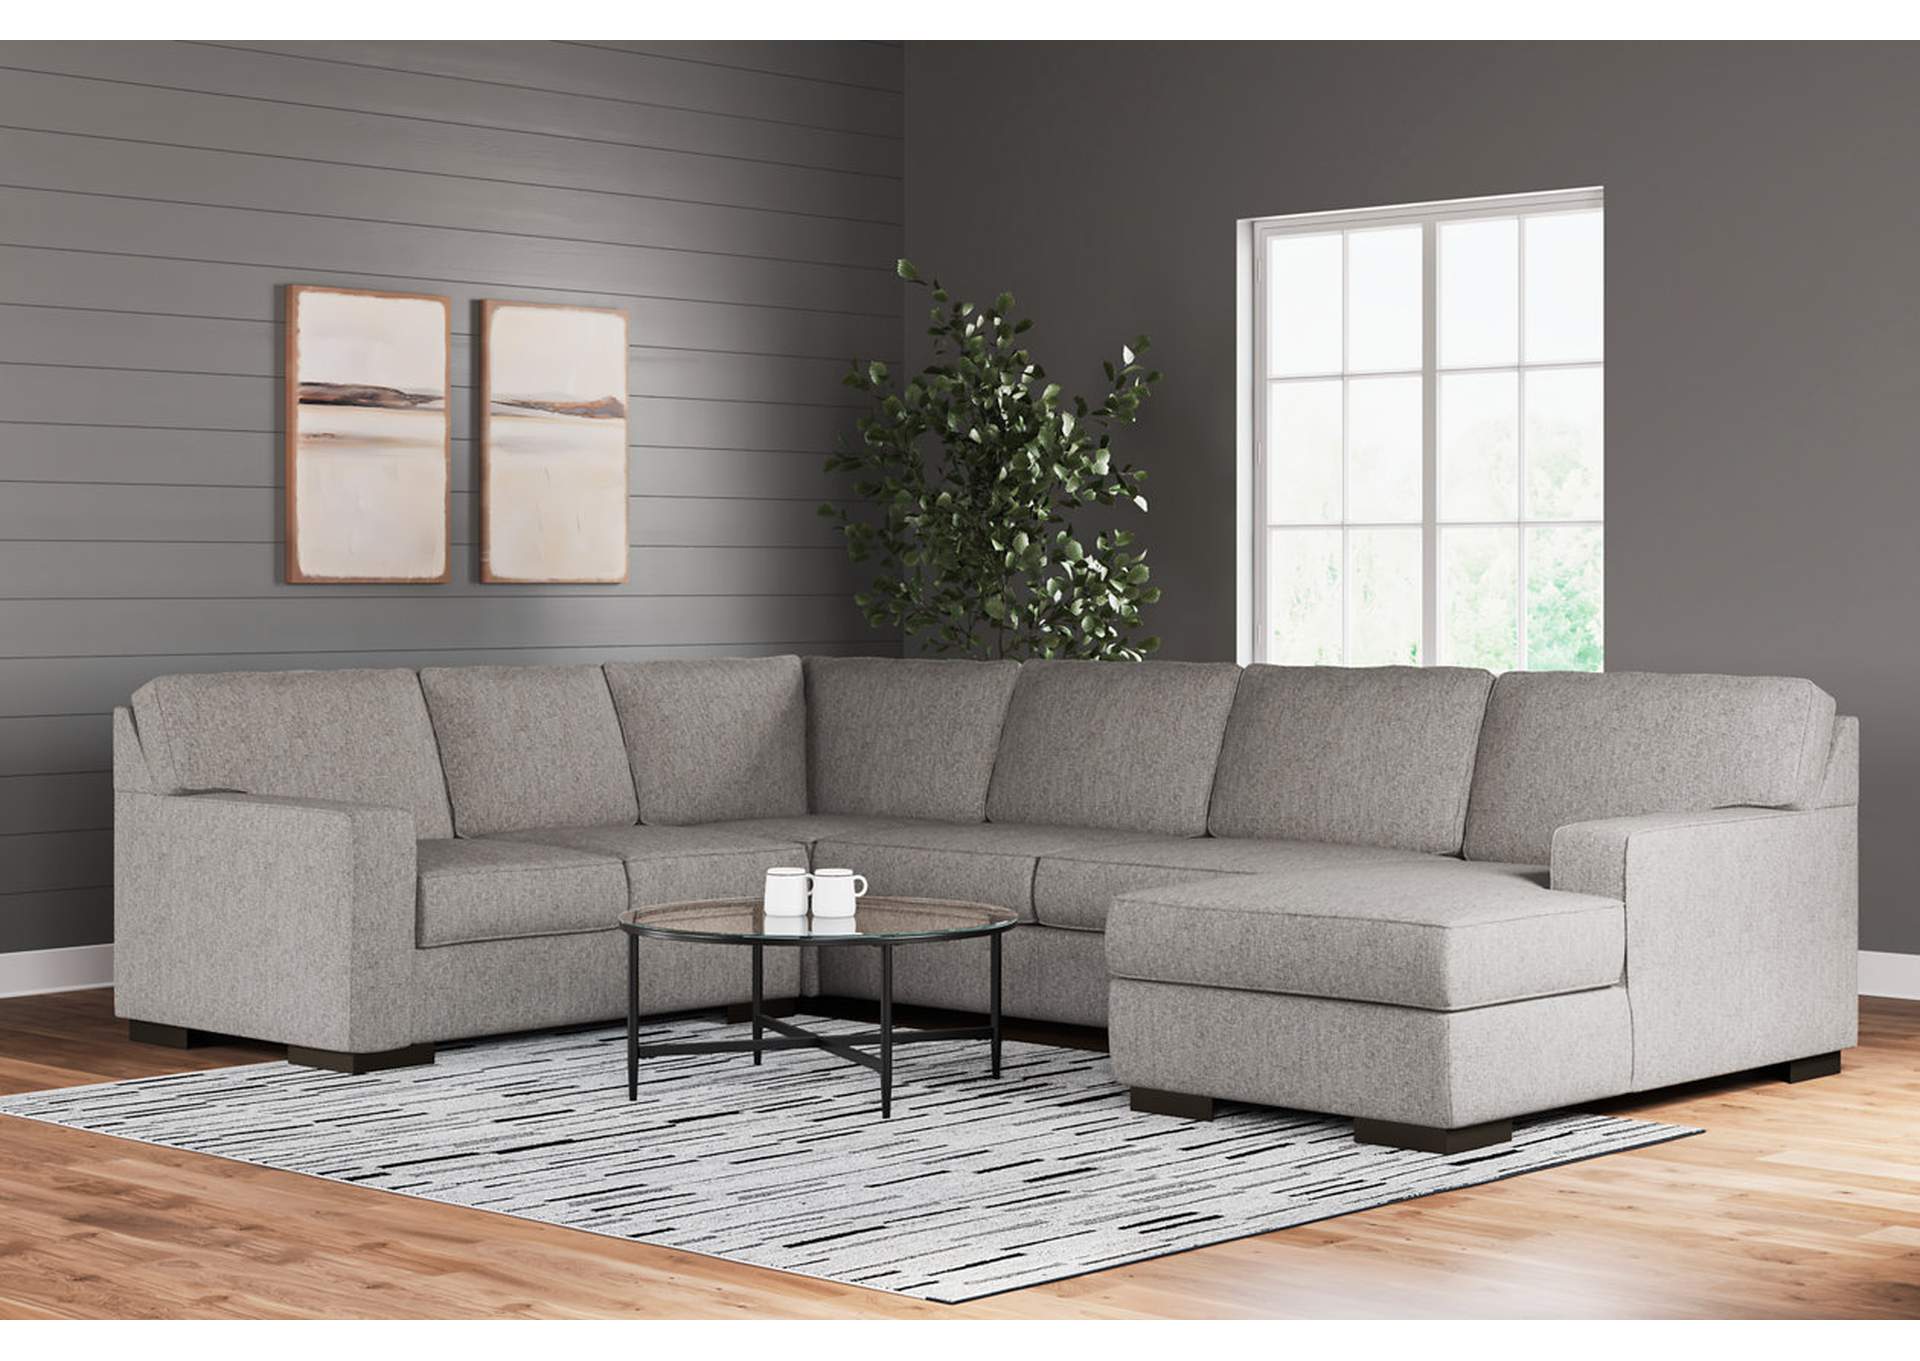 Ashlor Nuvella® 4-Piece Sleeper Sectional with Chaise,Ashley